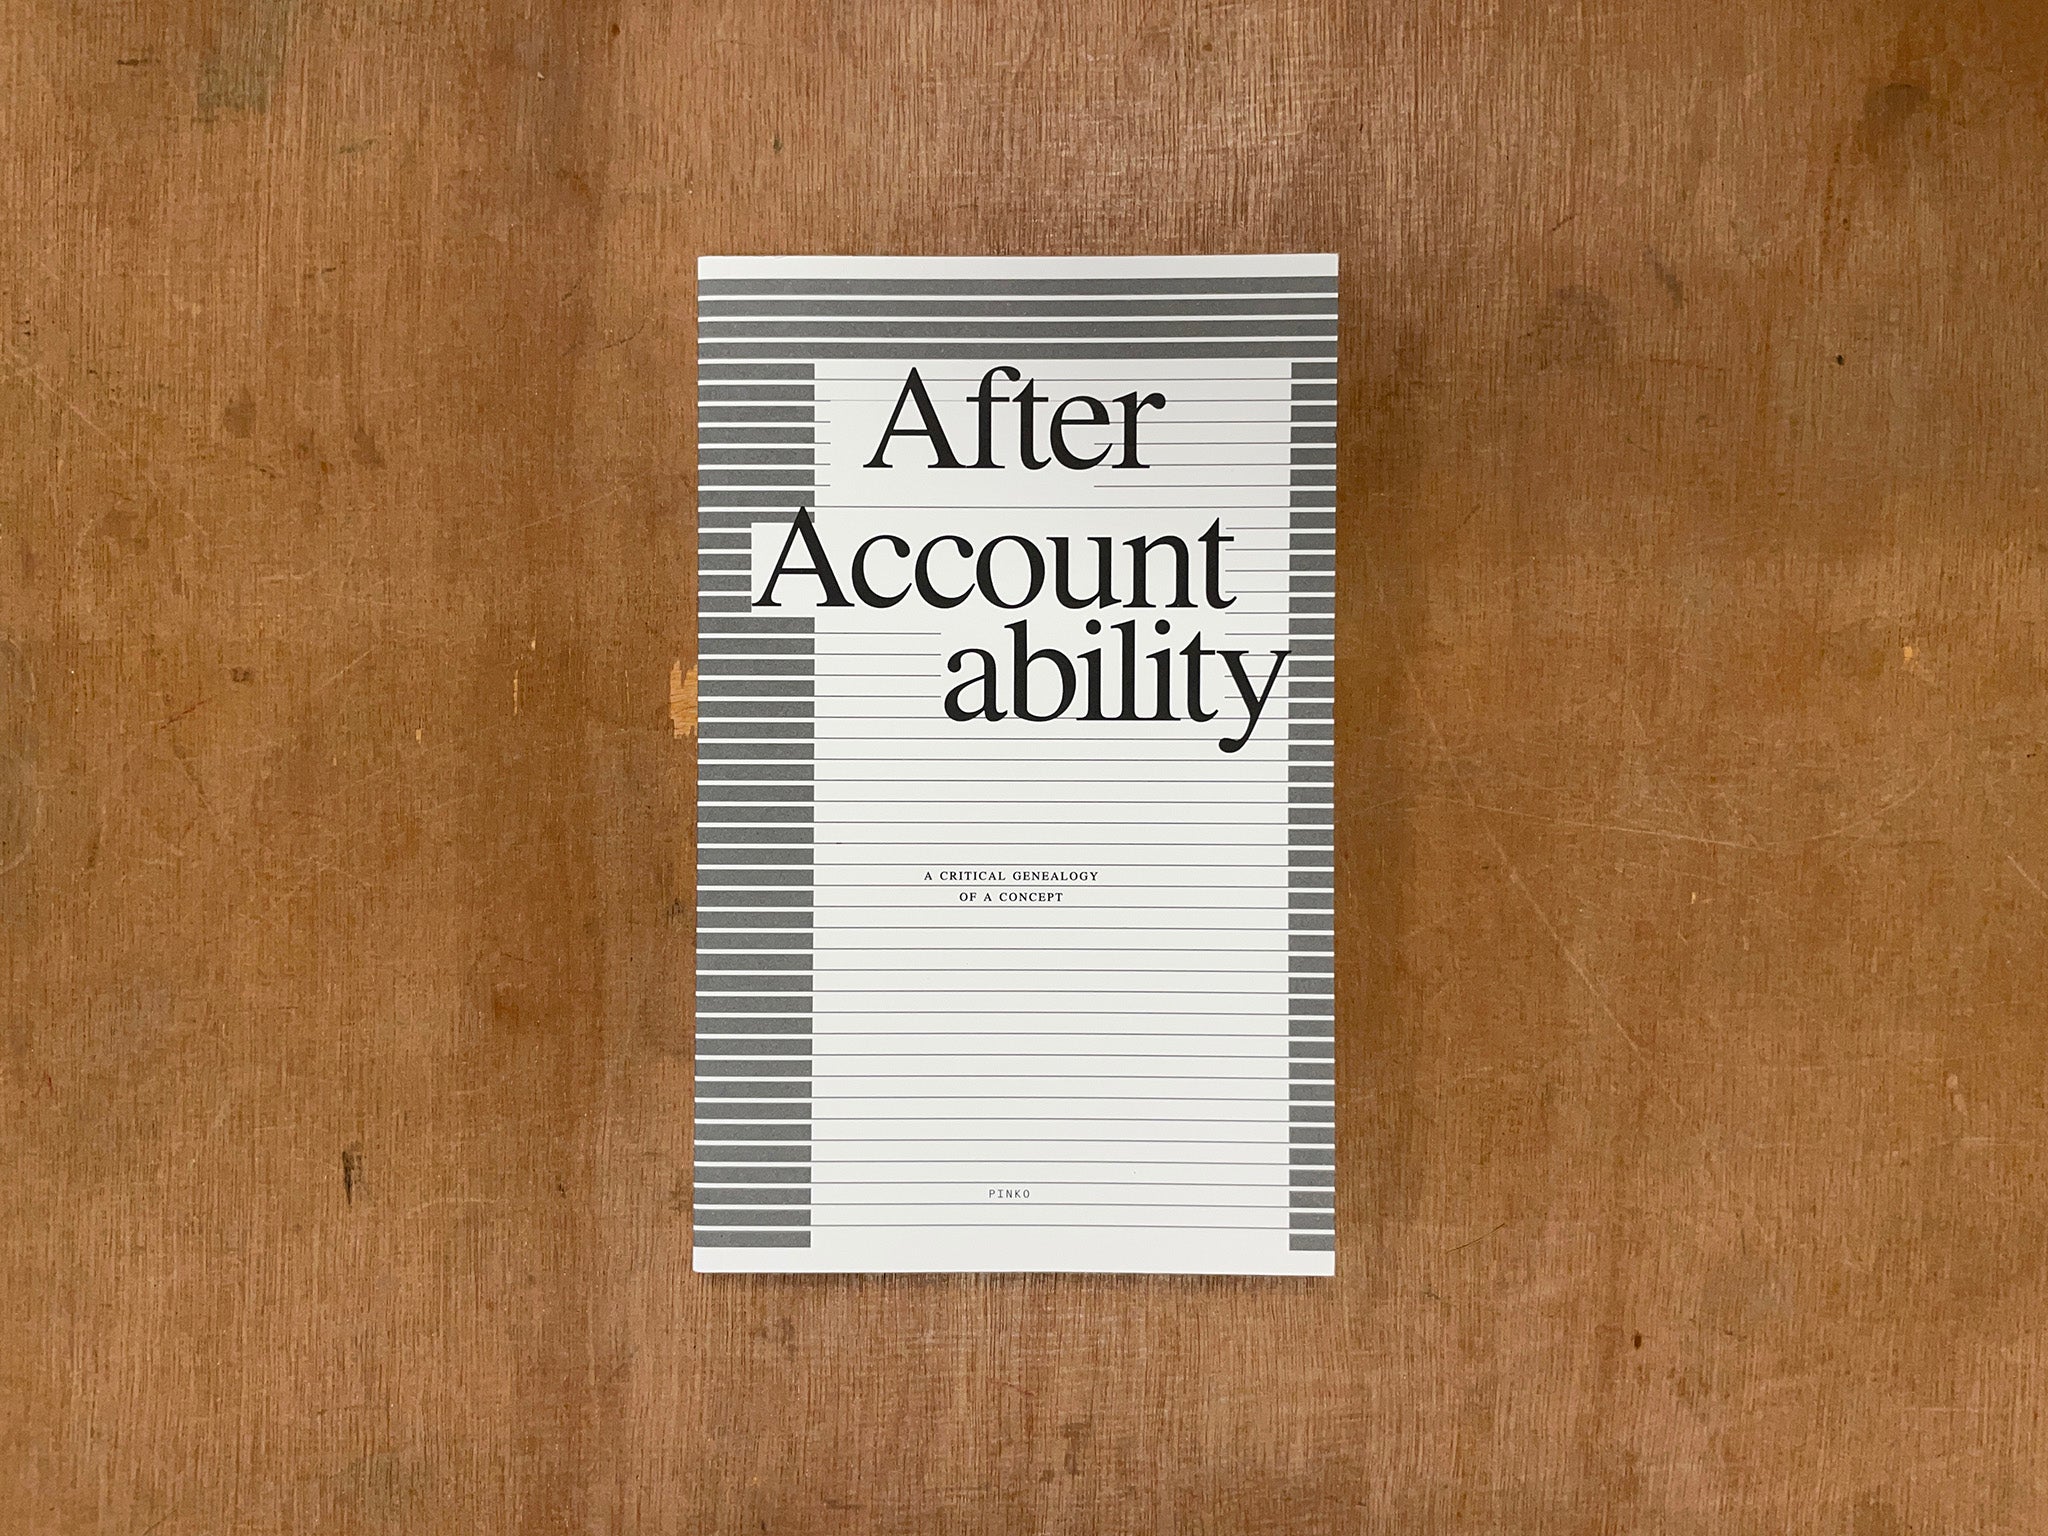 AFTER ACCOUNTABILITY: A CRITICAL GENEALOGY OF A CONCEPT Ed. by Pinko